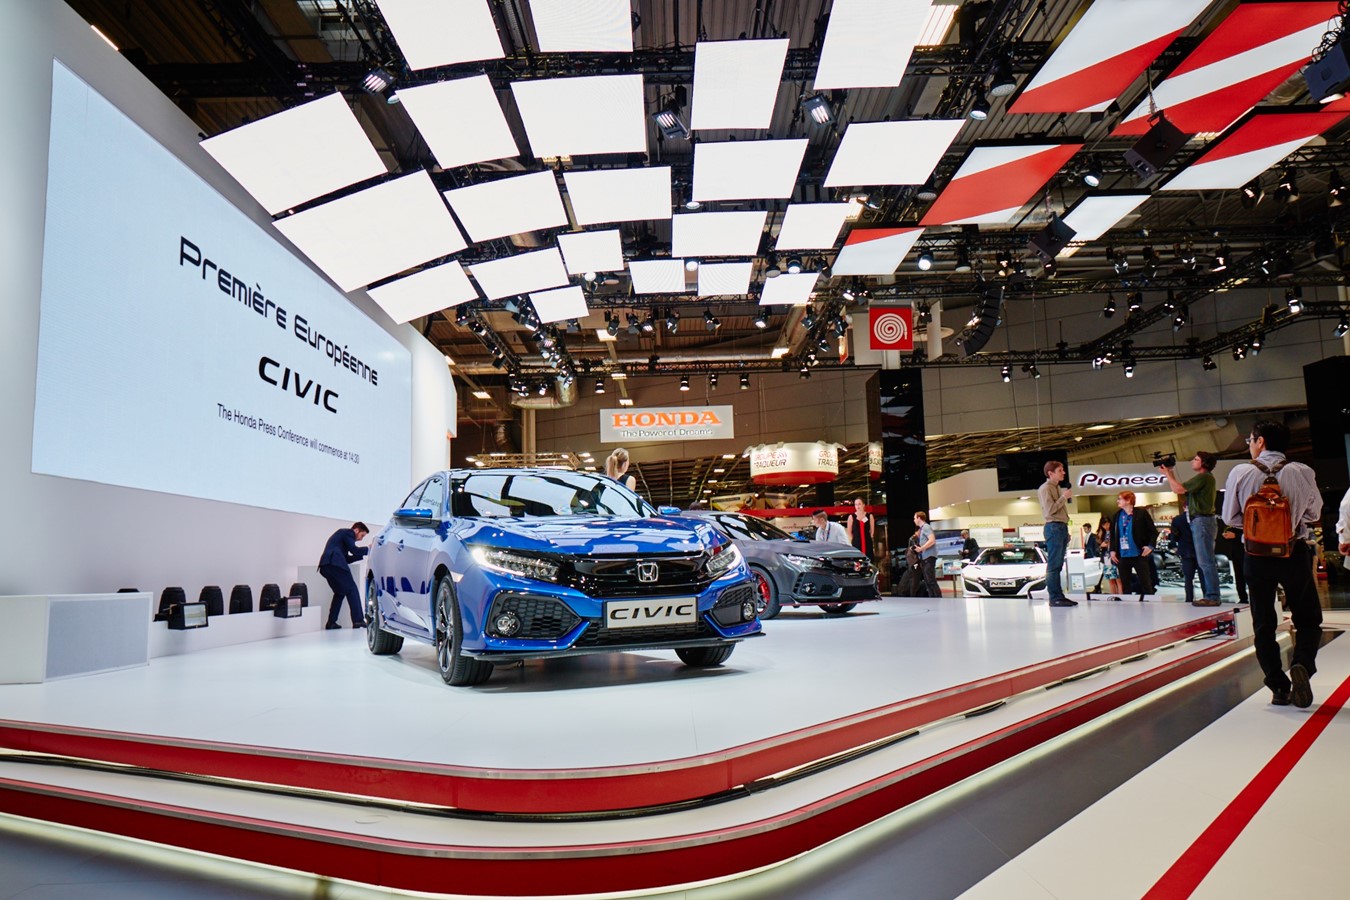 THE NEXT STEP IN HONDA’S RESURGENCE: CIVIC HATCHBACK AND TYPE R PROTOTYPE TAKE CENTRE STAGE AT PARIS 